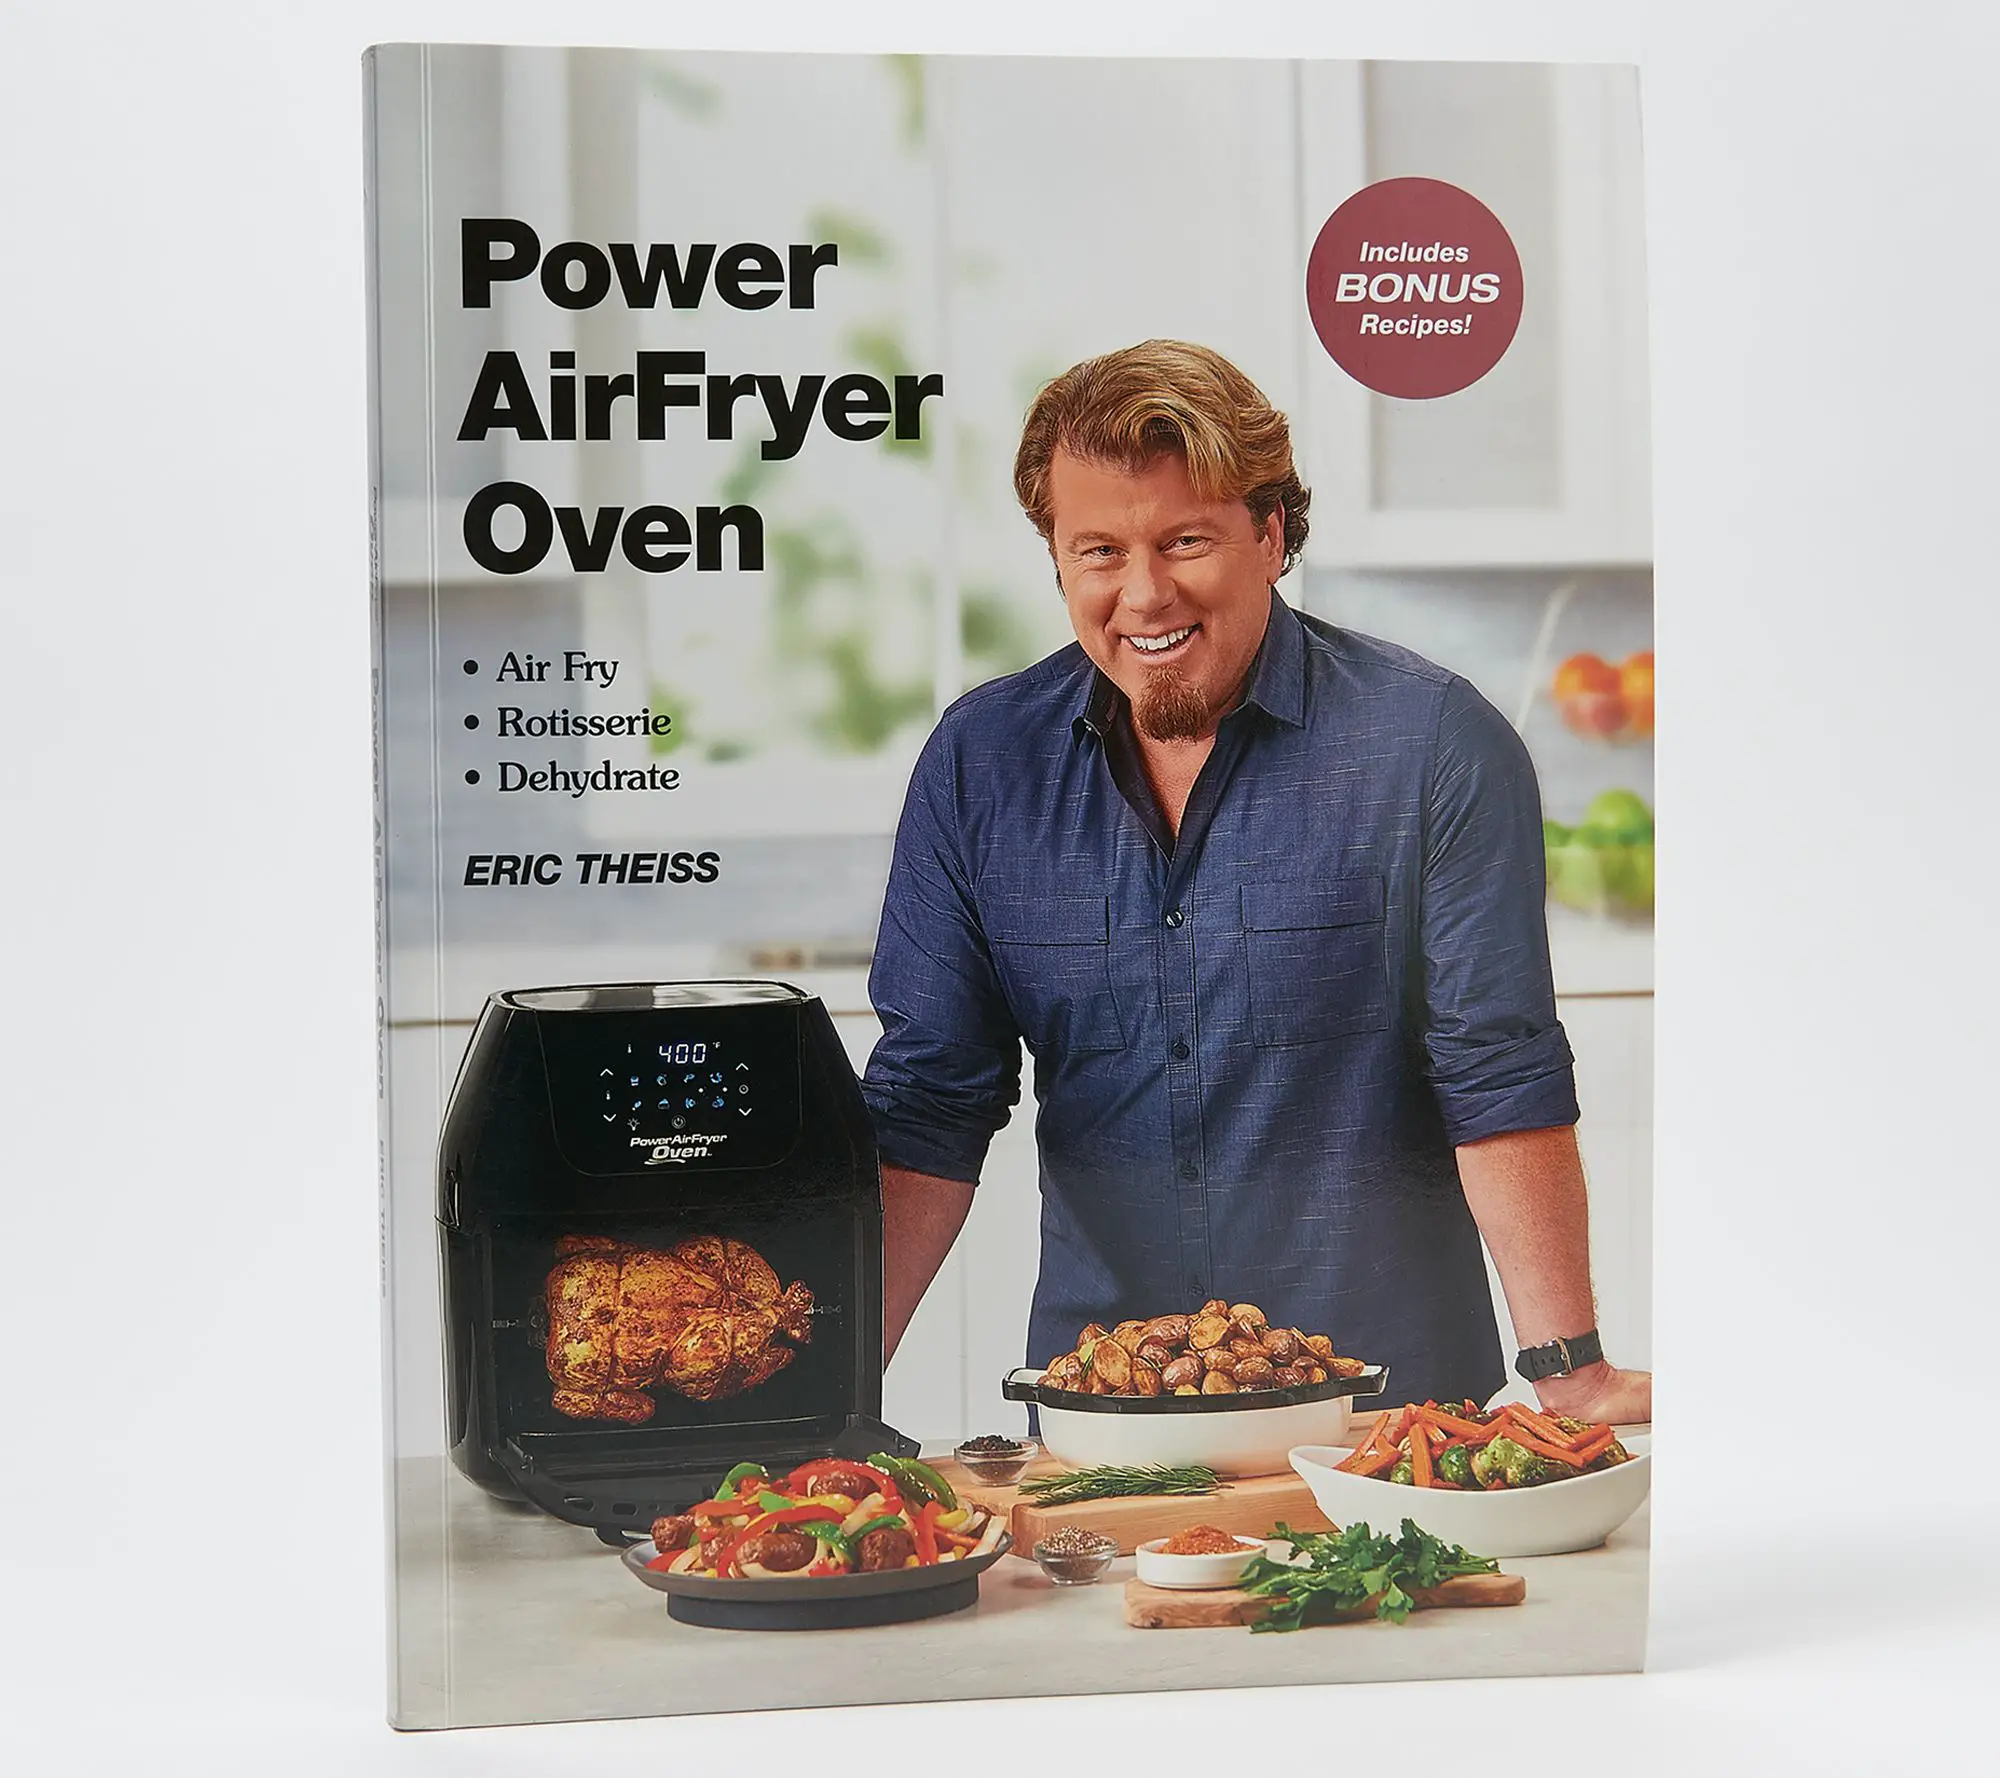 The Power Air Fryer Oven Cookbook by Eric Theiss